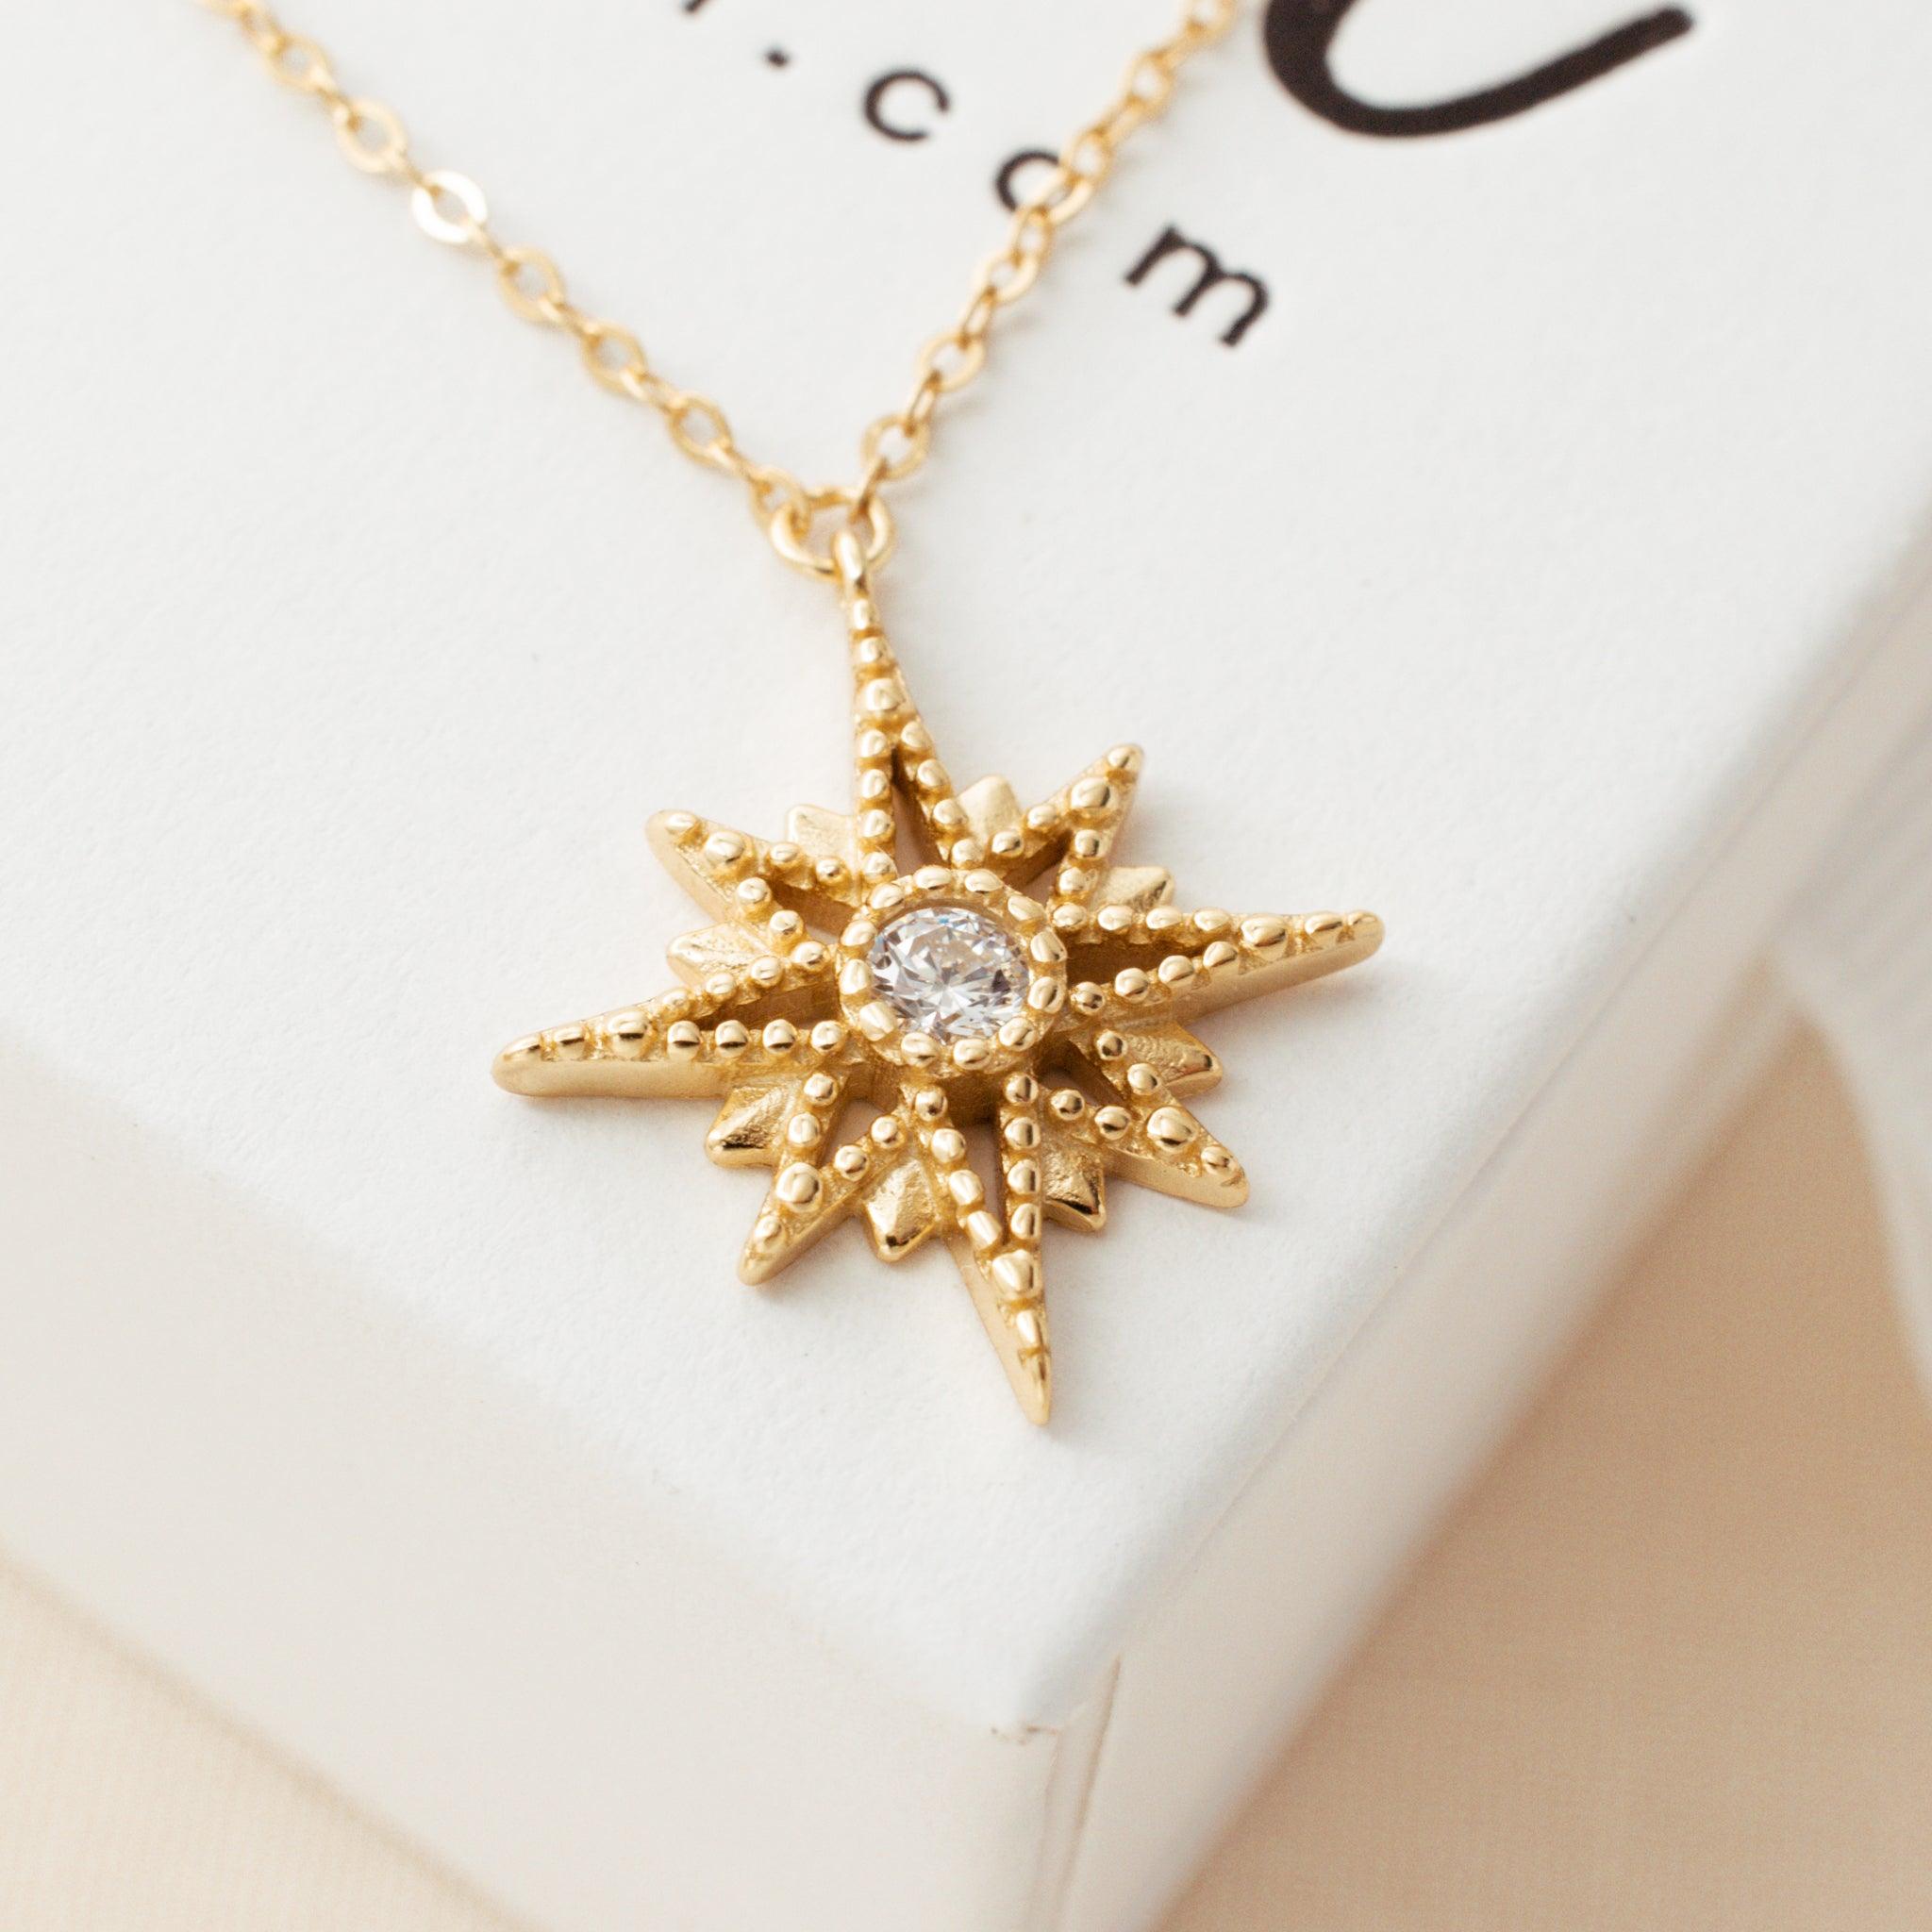 North Star Necklace on a white jewelry box by Avante Jewel